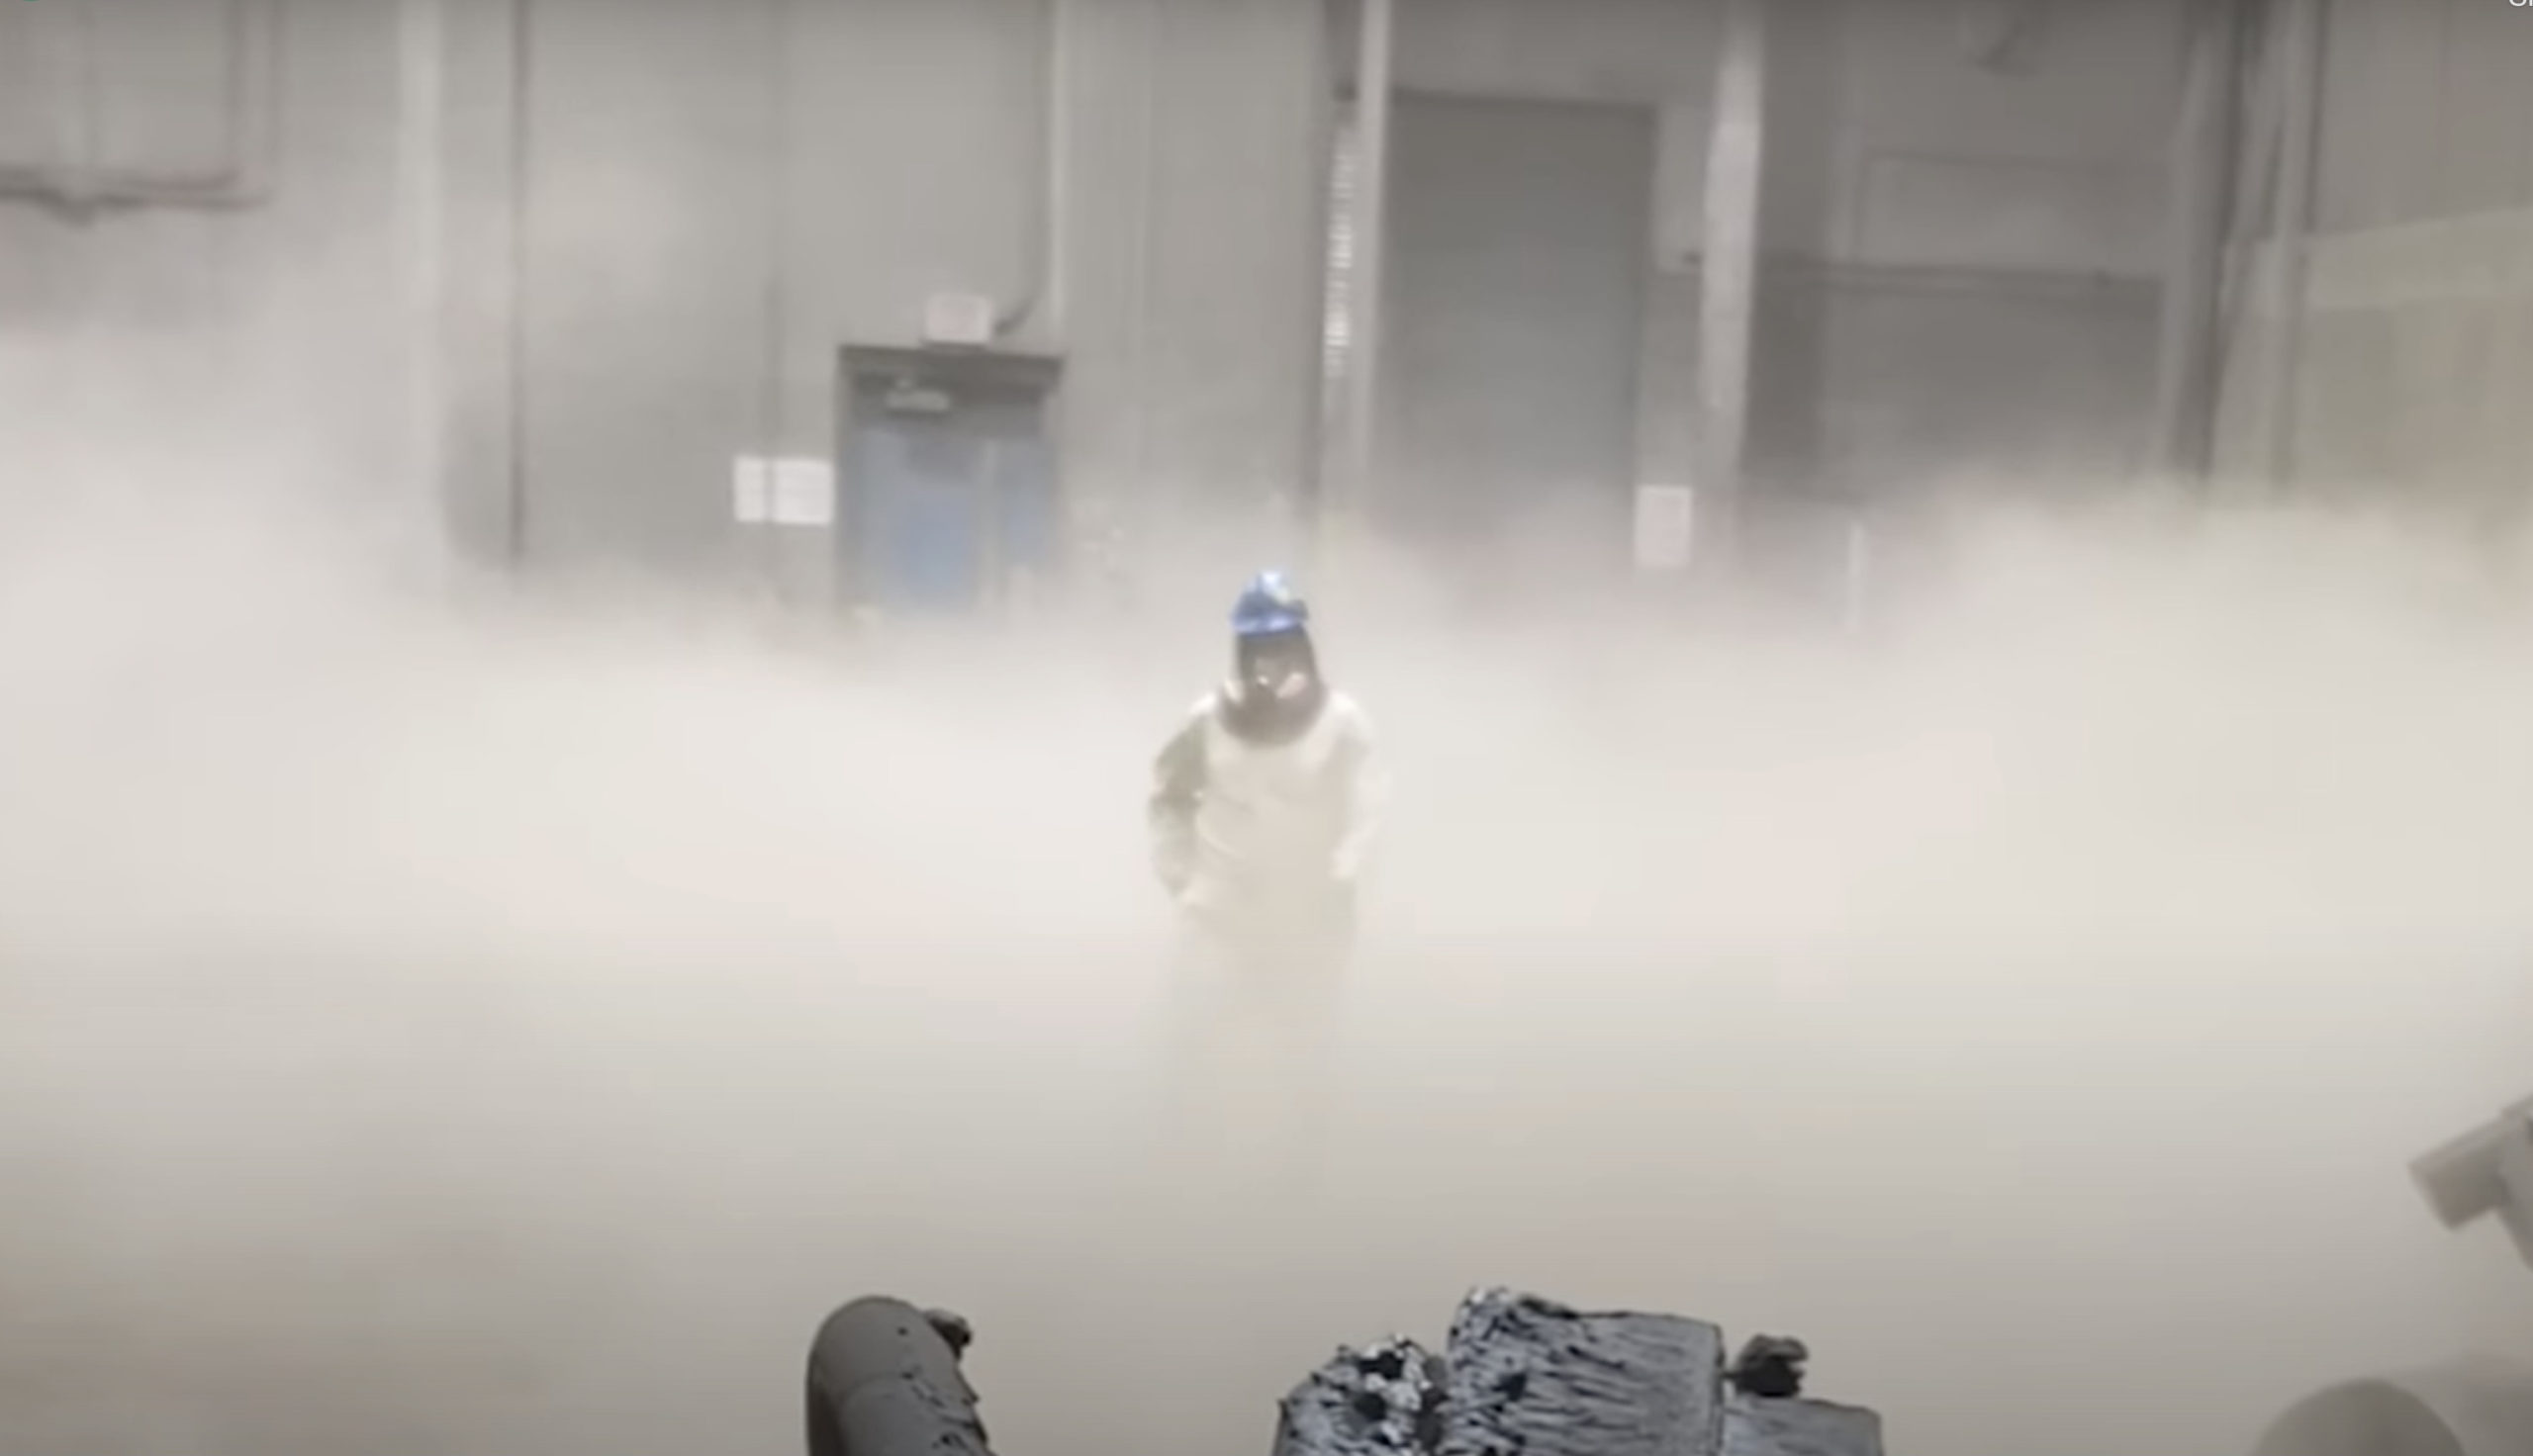 In Tampa, Florida, a Gopher Resource worker on the factory floor is surrounded by a cloud of lead dust